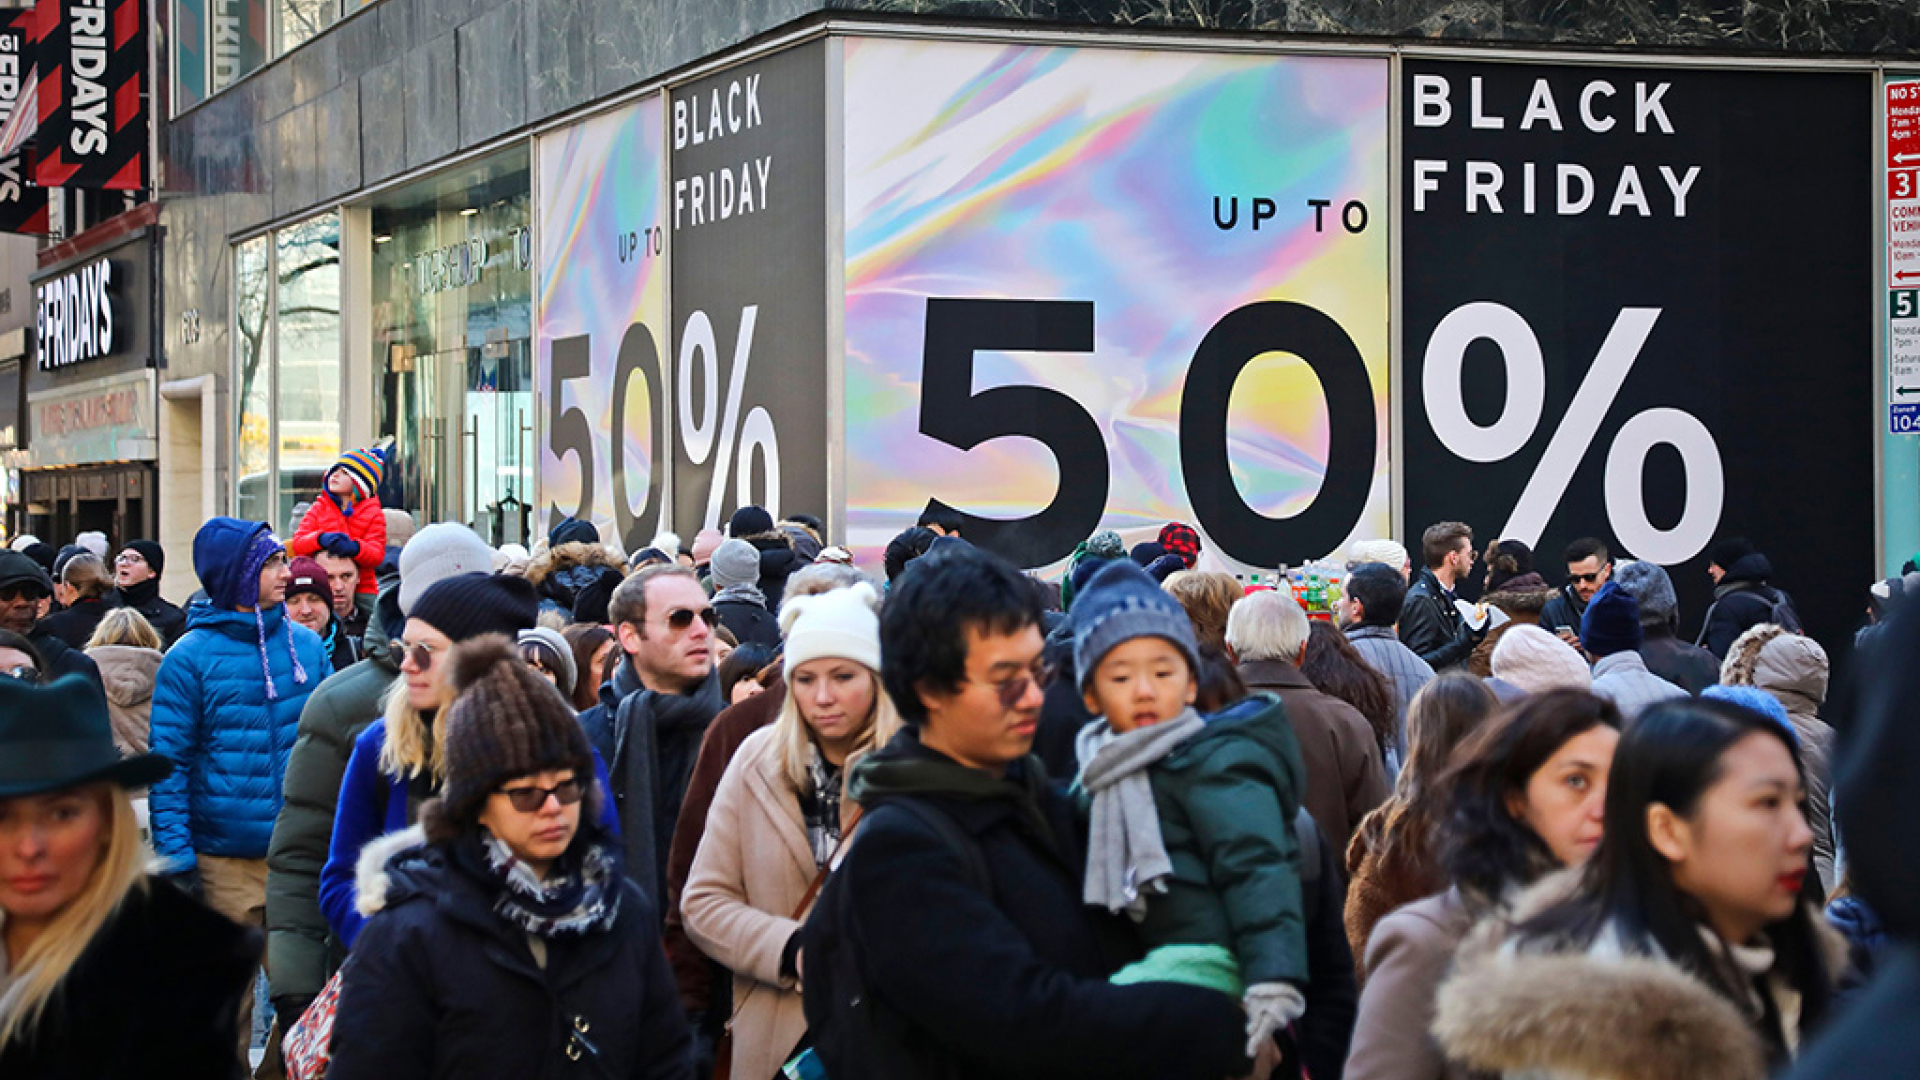 Promote your Black Friday deals in national media